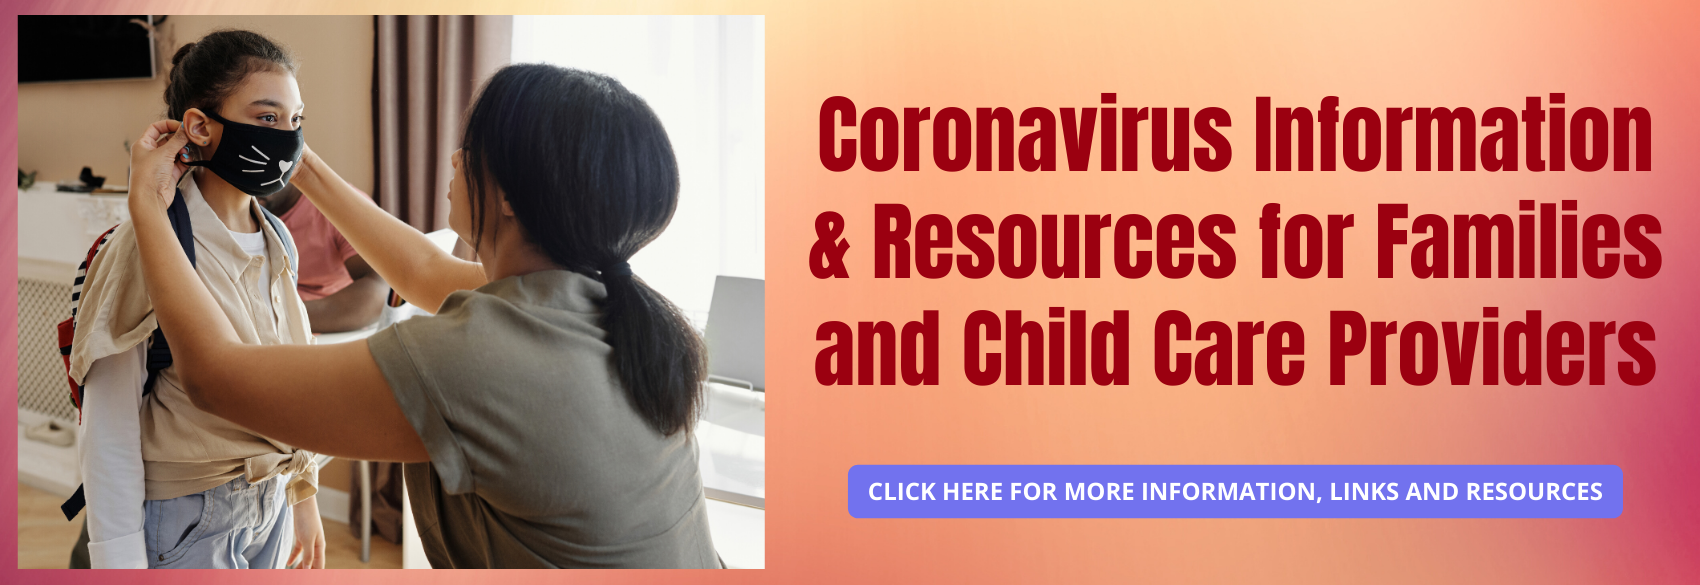 Coronavirus Information & Resources for Families and Child Care Providers